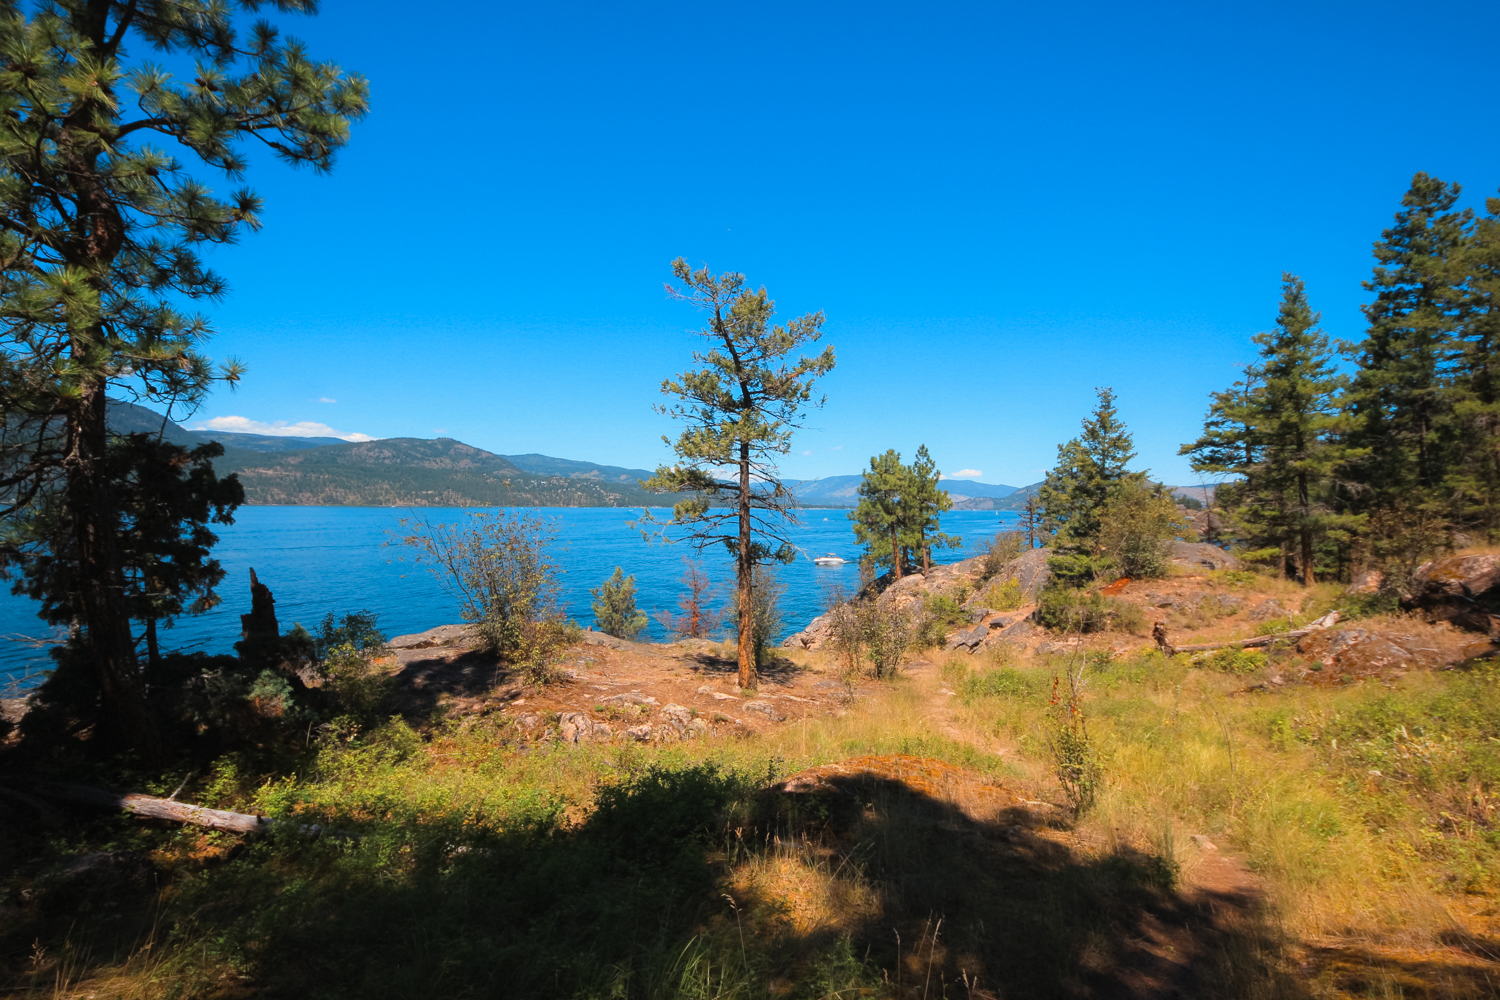 Hiking trail along Okanagan Lake in Ellison Provincial Park on a sunny, summer day.